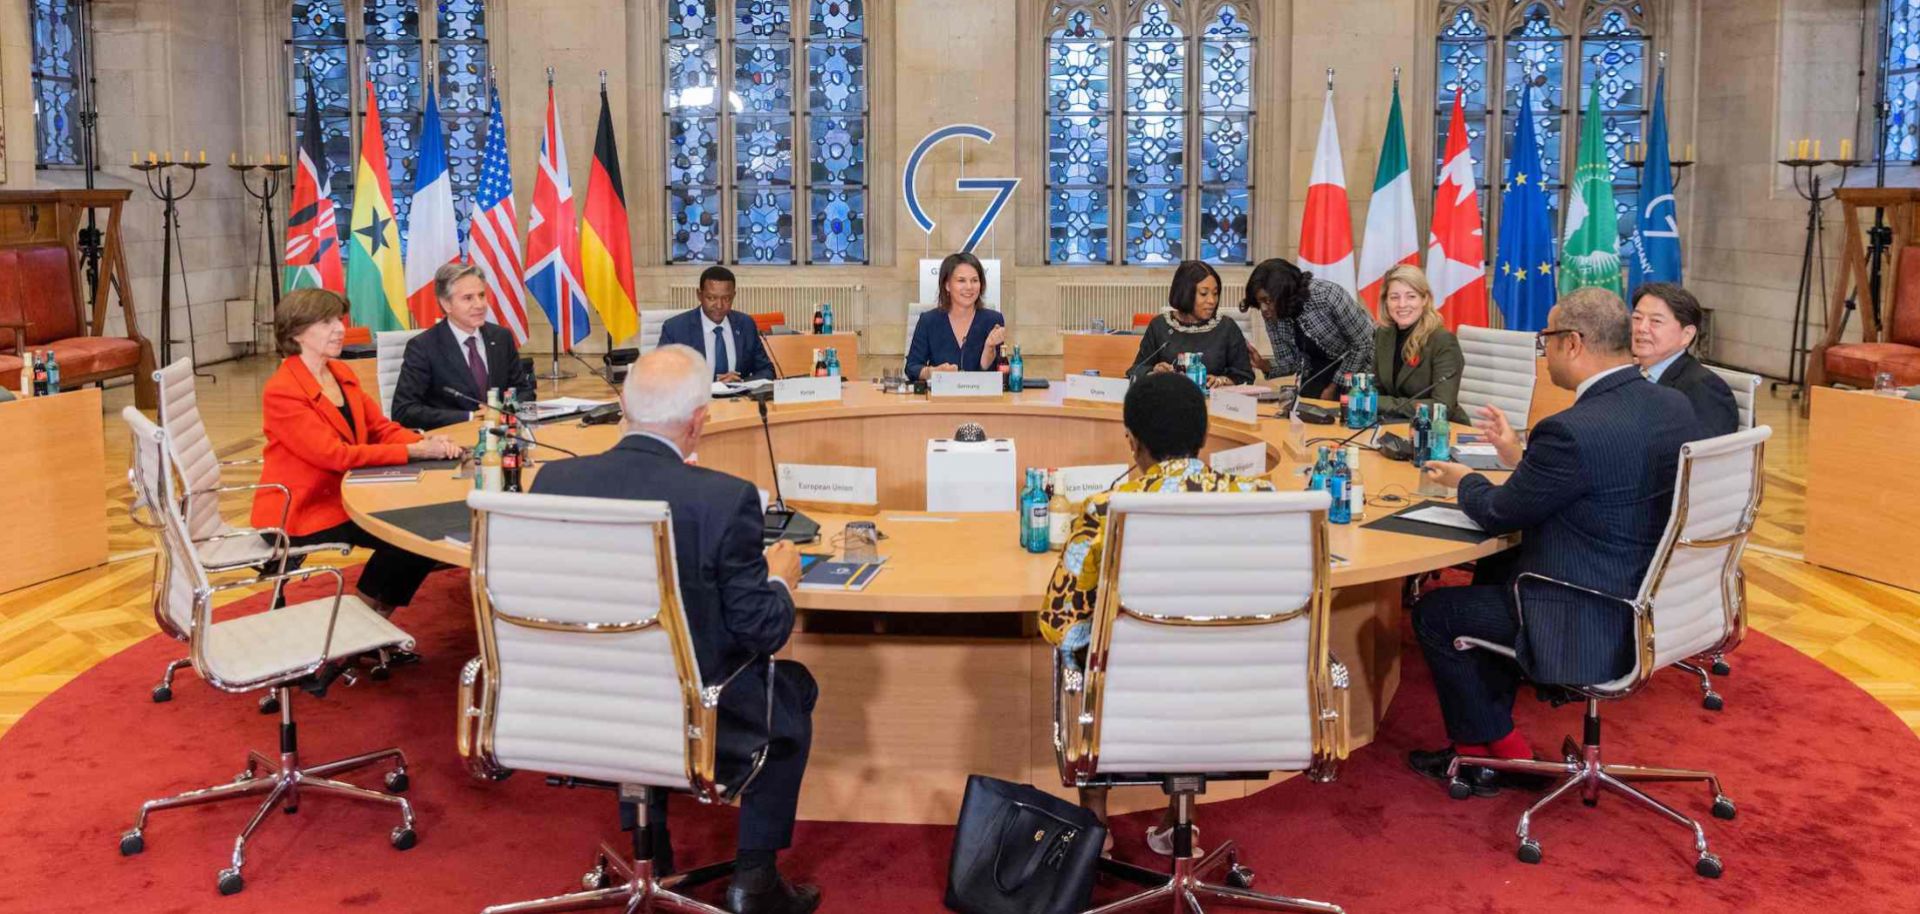 Officials from Germany, Ghana, Canada, Japan, the United Kingdom, the African Union, the European Union, France, the United States and Kenya participate in a working session at a G-7 Foreign Ministers Meeting in Muenster, western Germany, on Nov. 4, 2022. 